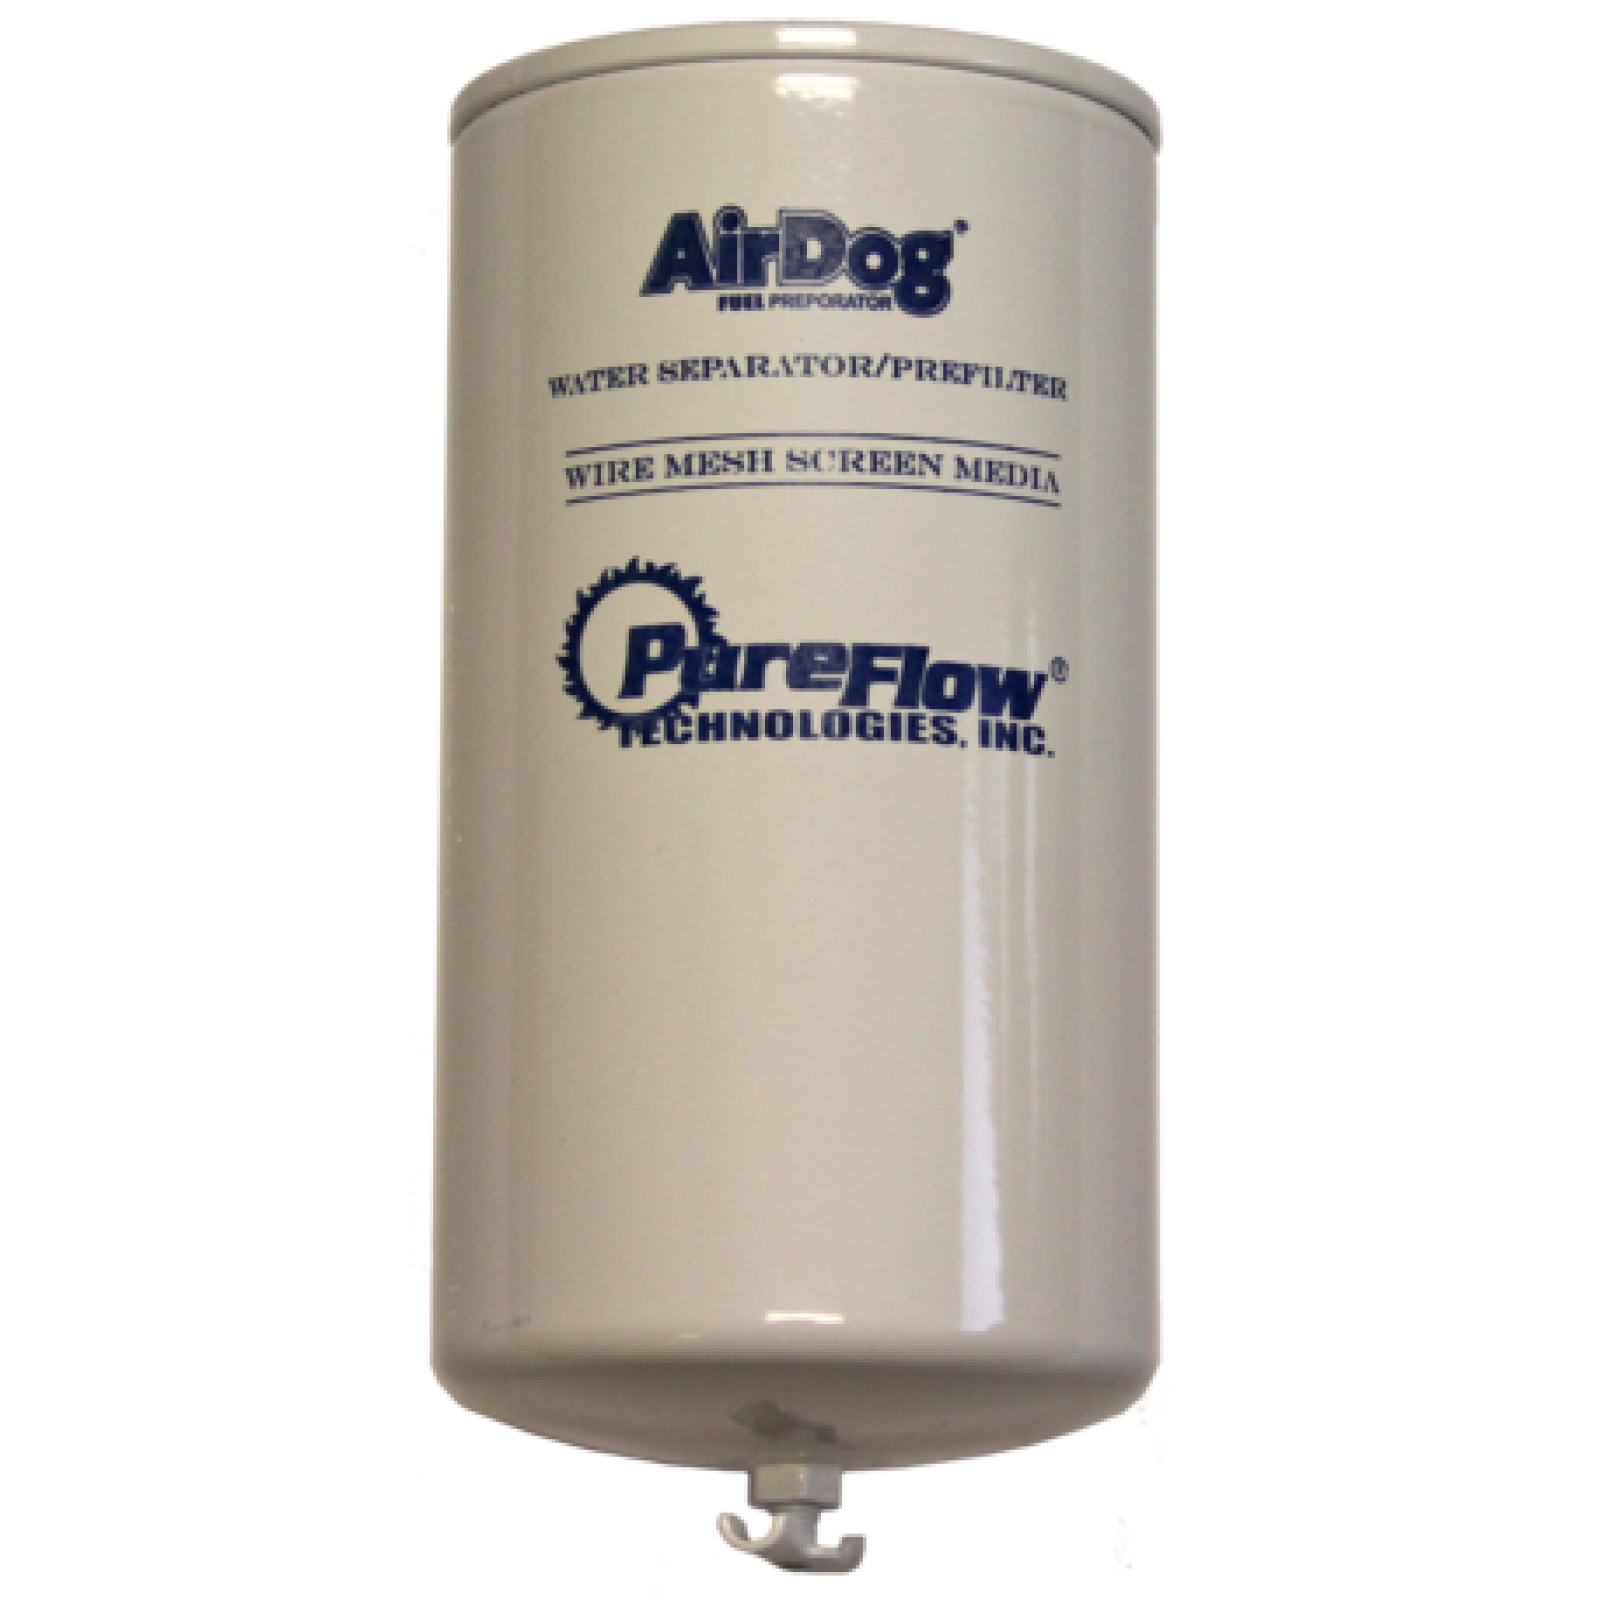 WS200-WS: AirDog® Water Separator (wire screen with drain) for FPII-150 & FPII-200